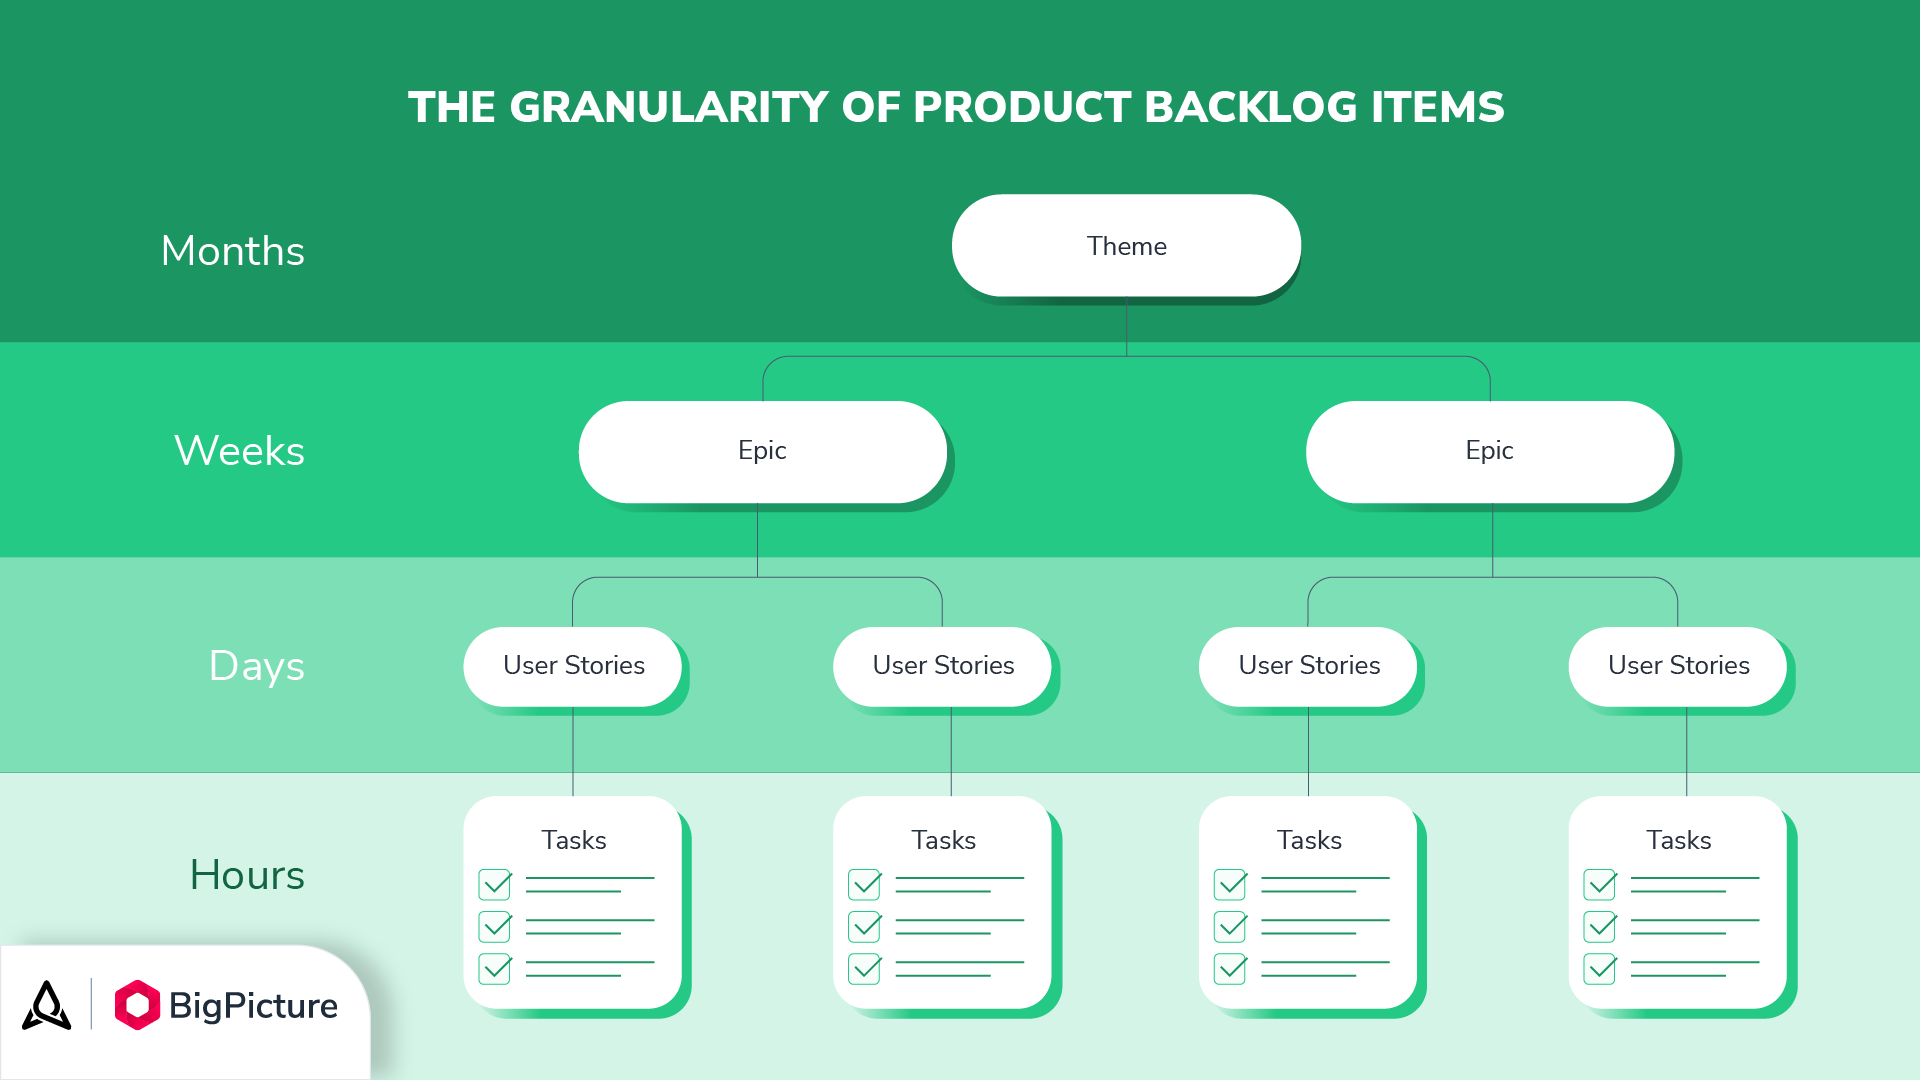 A graph illustrating the granularity of product backlog items. Going from the top to the bottom, there are is a theme, then epics followed by user stories and tasks. Theme takes months, epic takes weeks, user stories take days, and tasks take hours.